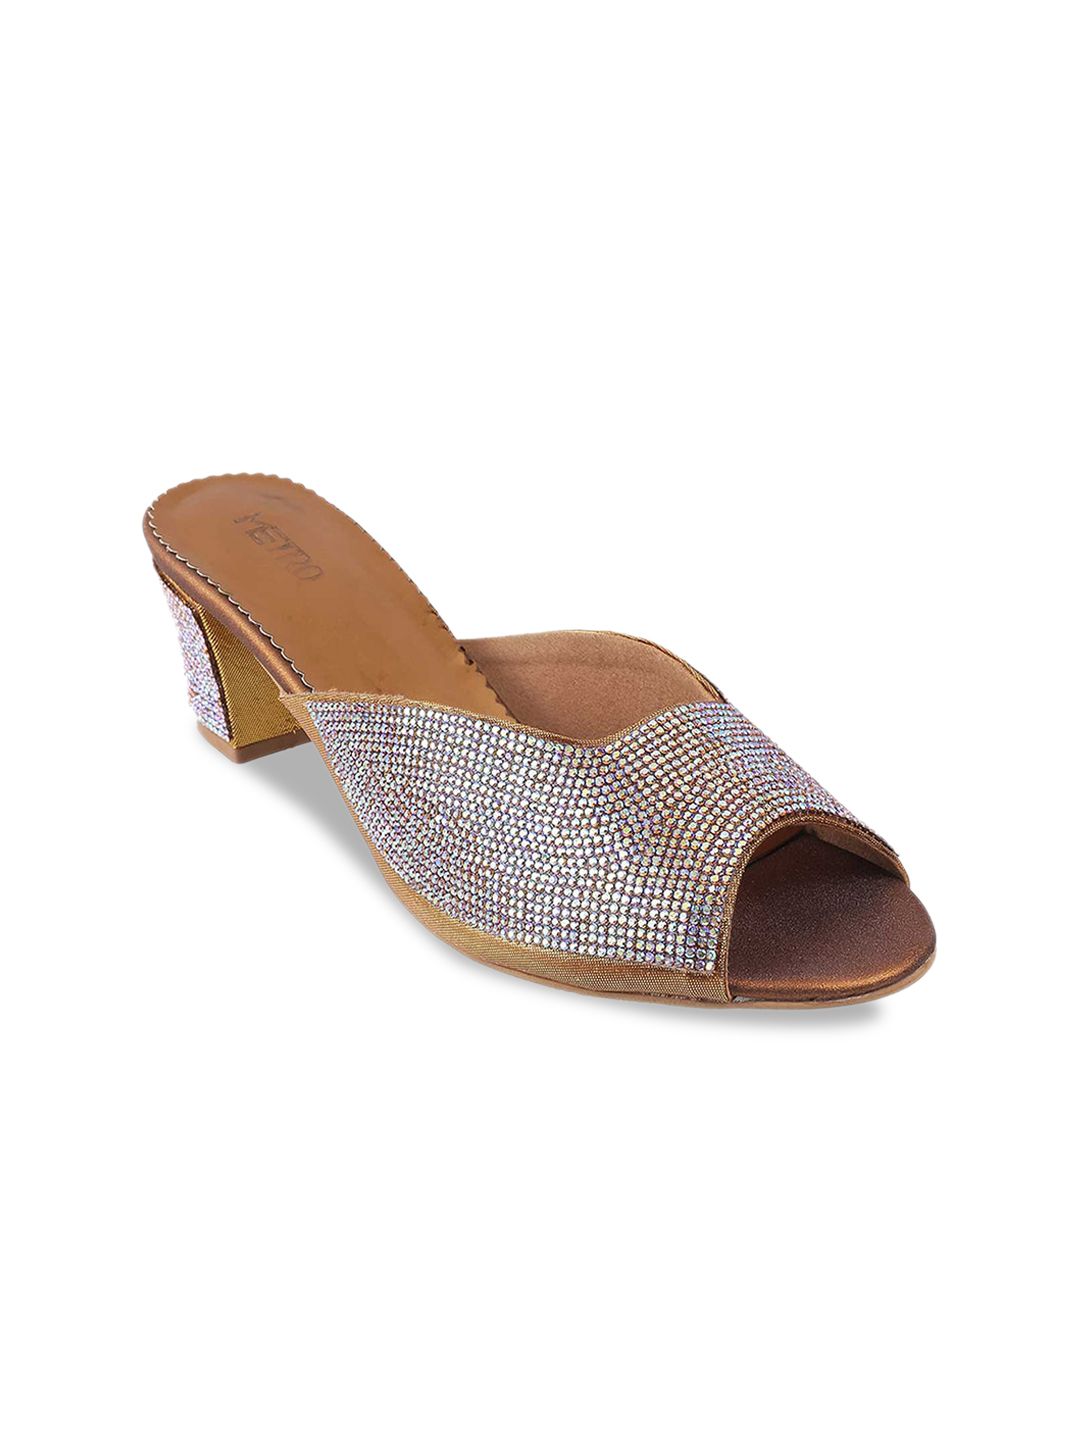 Metro Gold-Toned Embellished Block Peep Toes Price in India